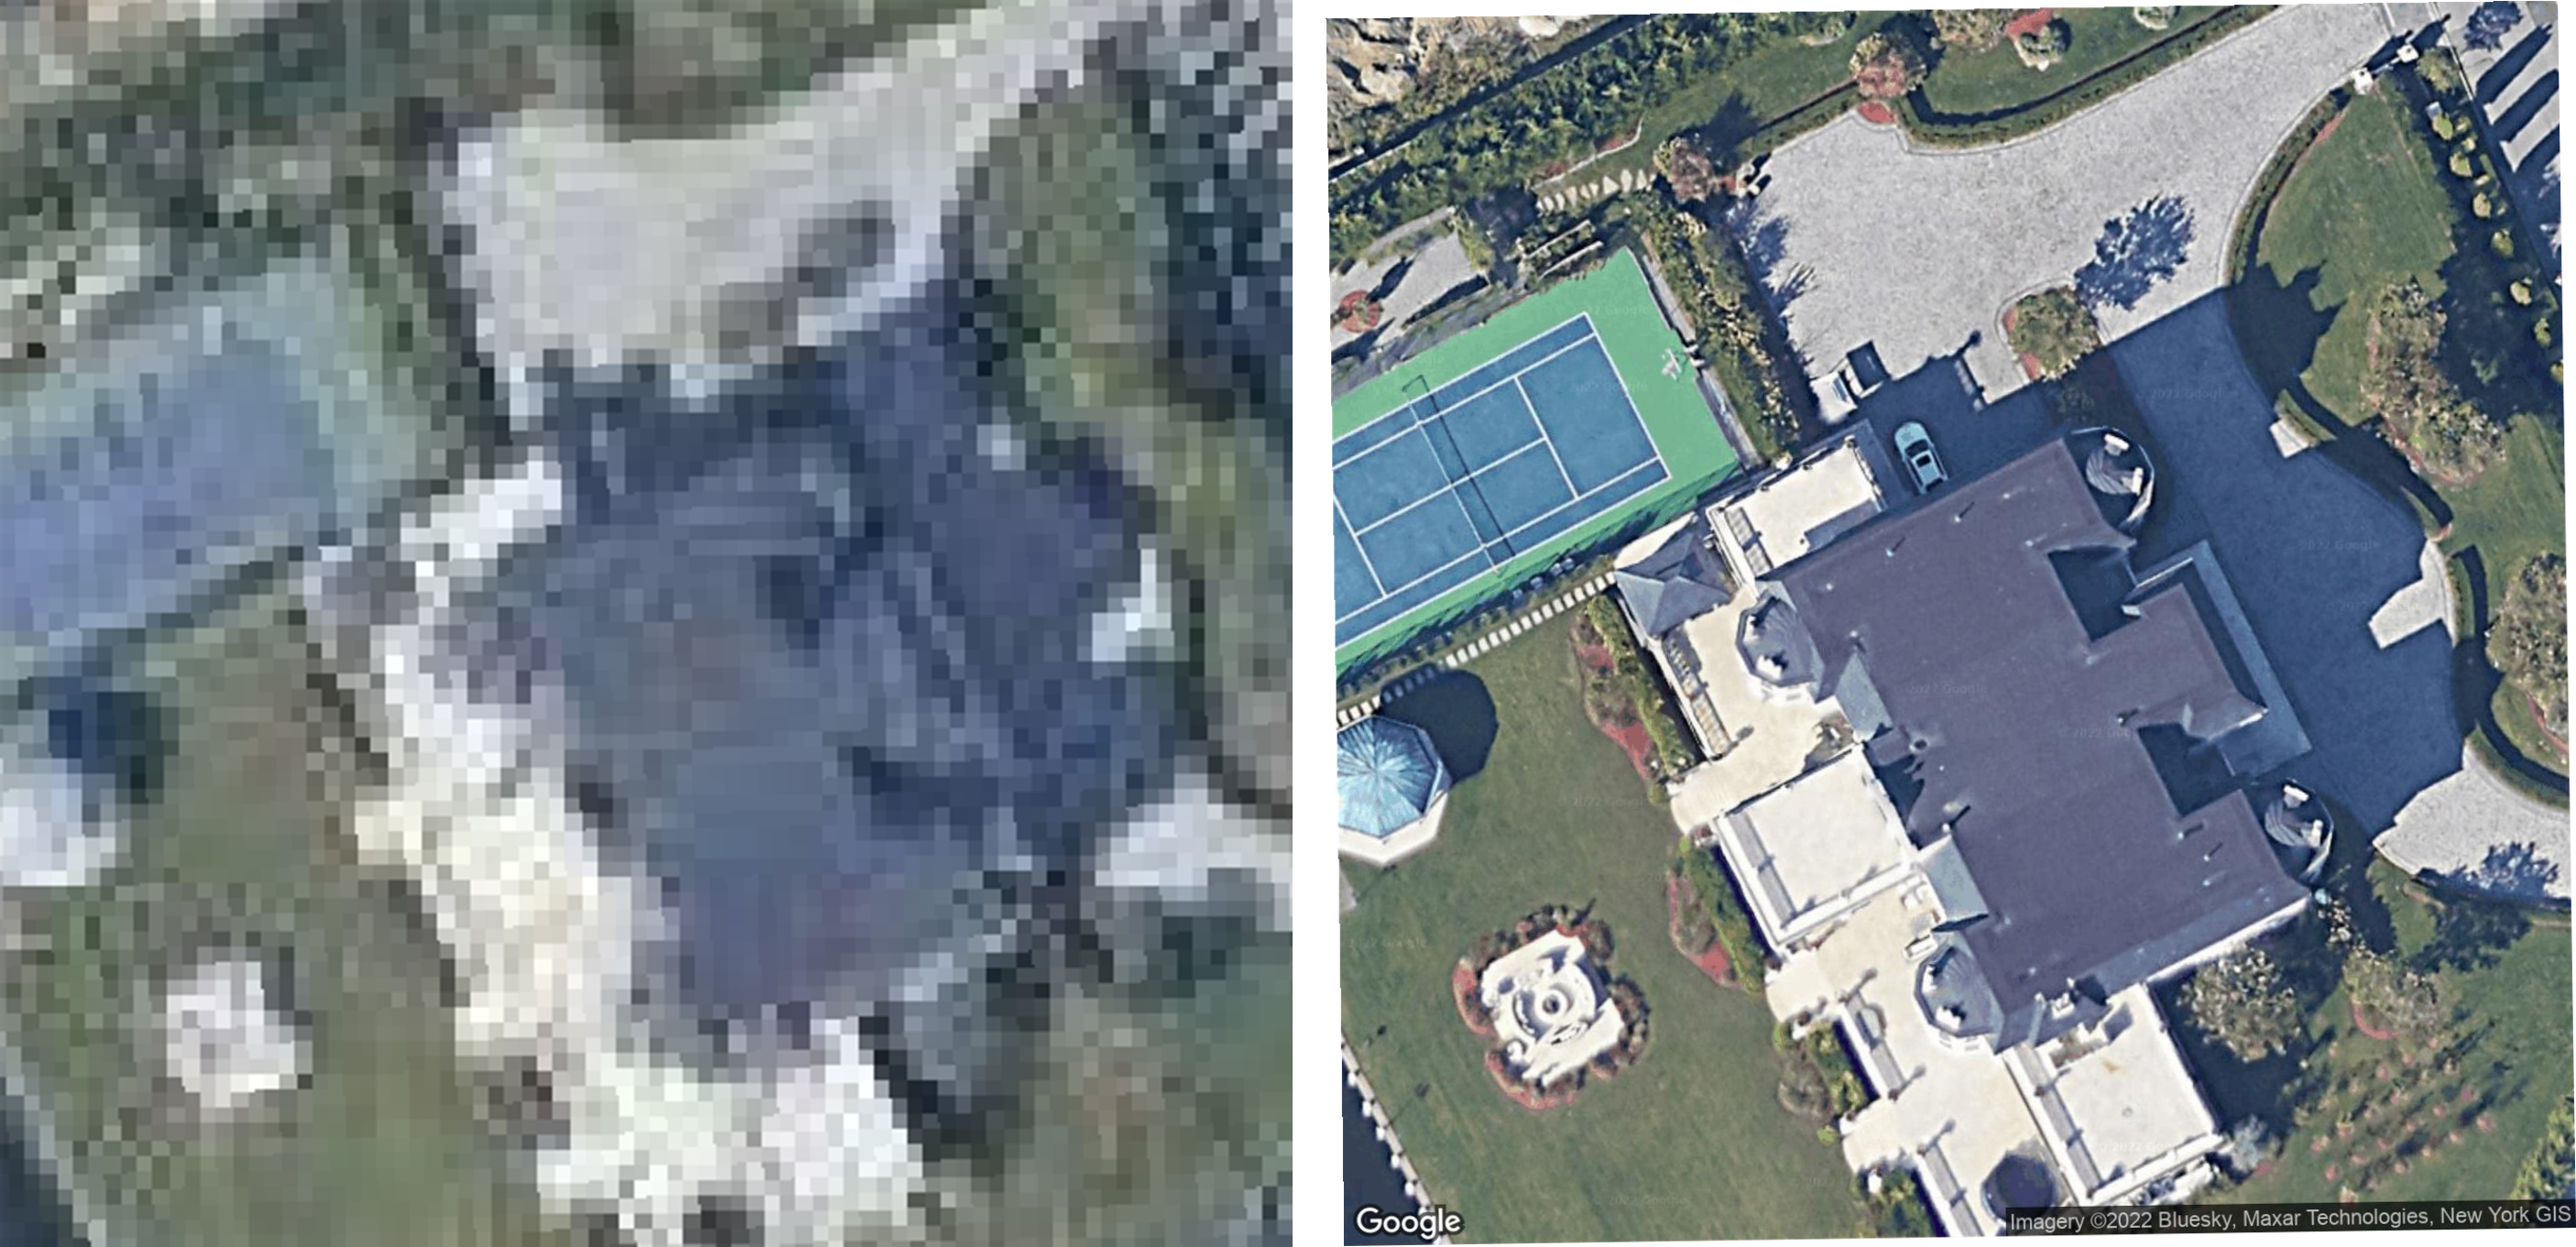 Quick_View__zoom_level_17__vs._Mosaic__zoom_level_21_.png